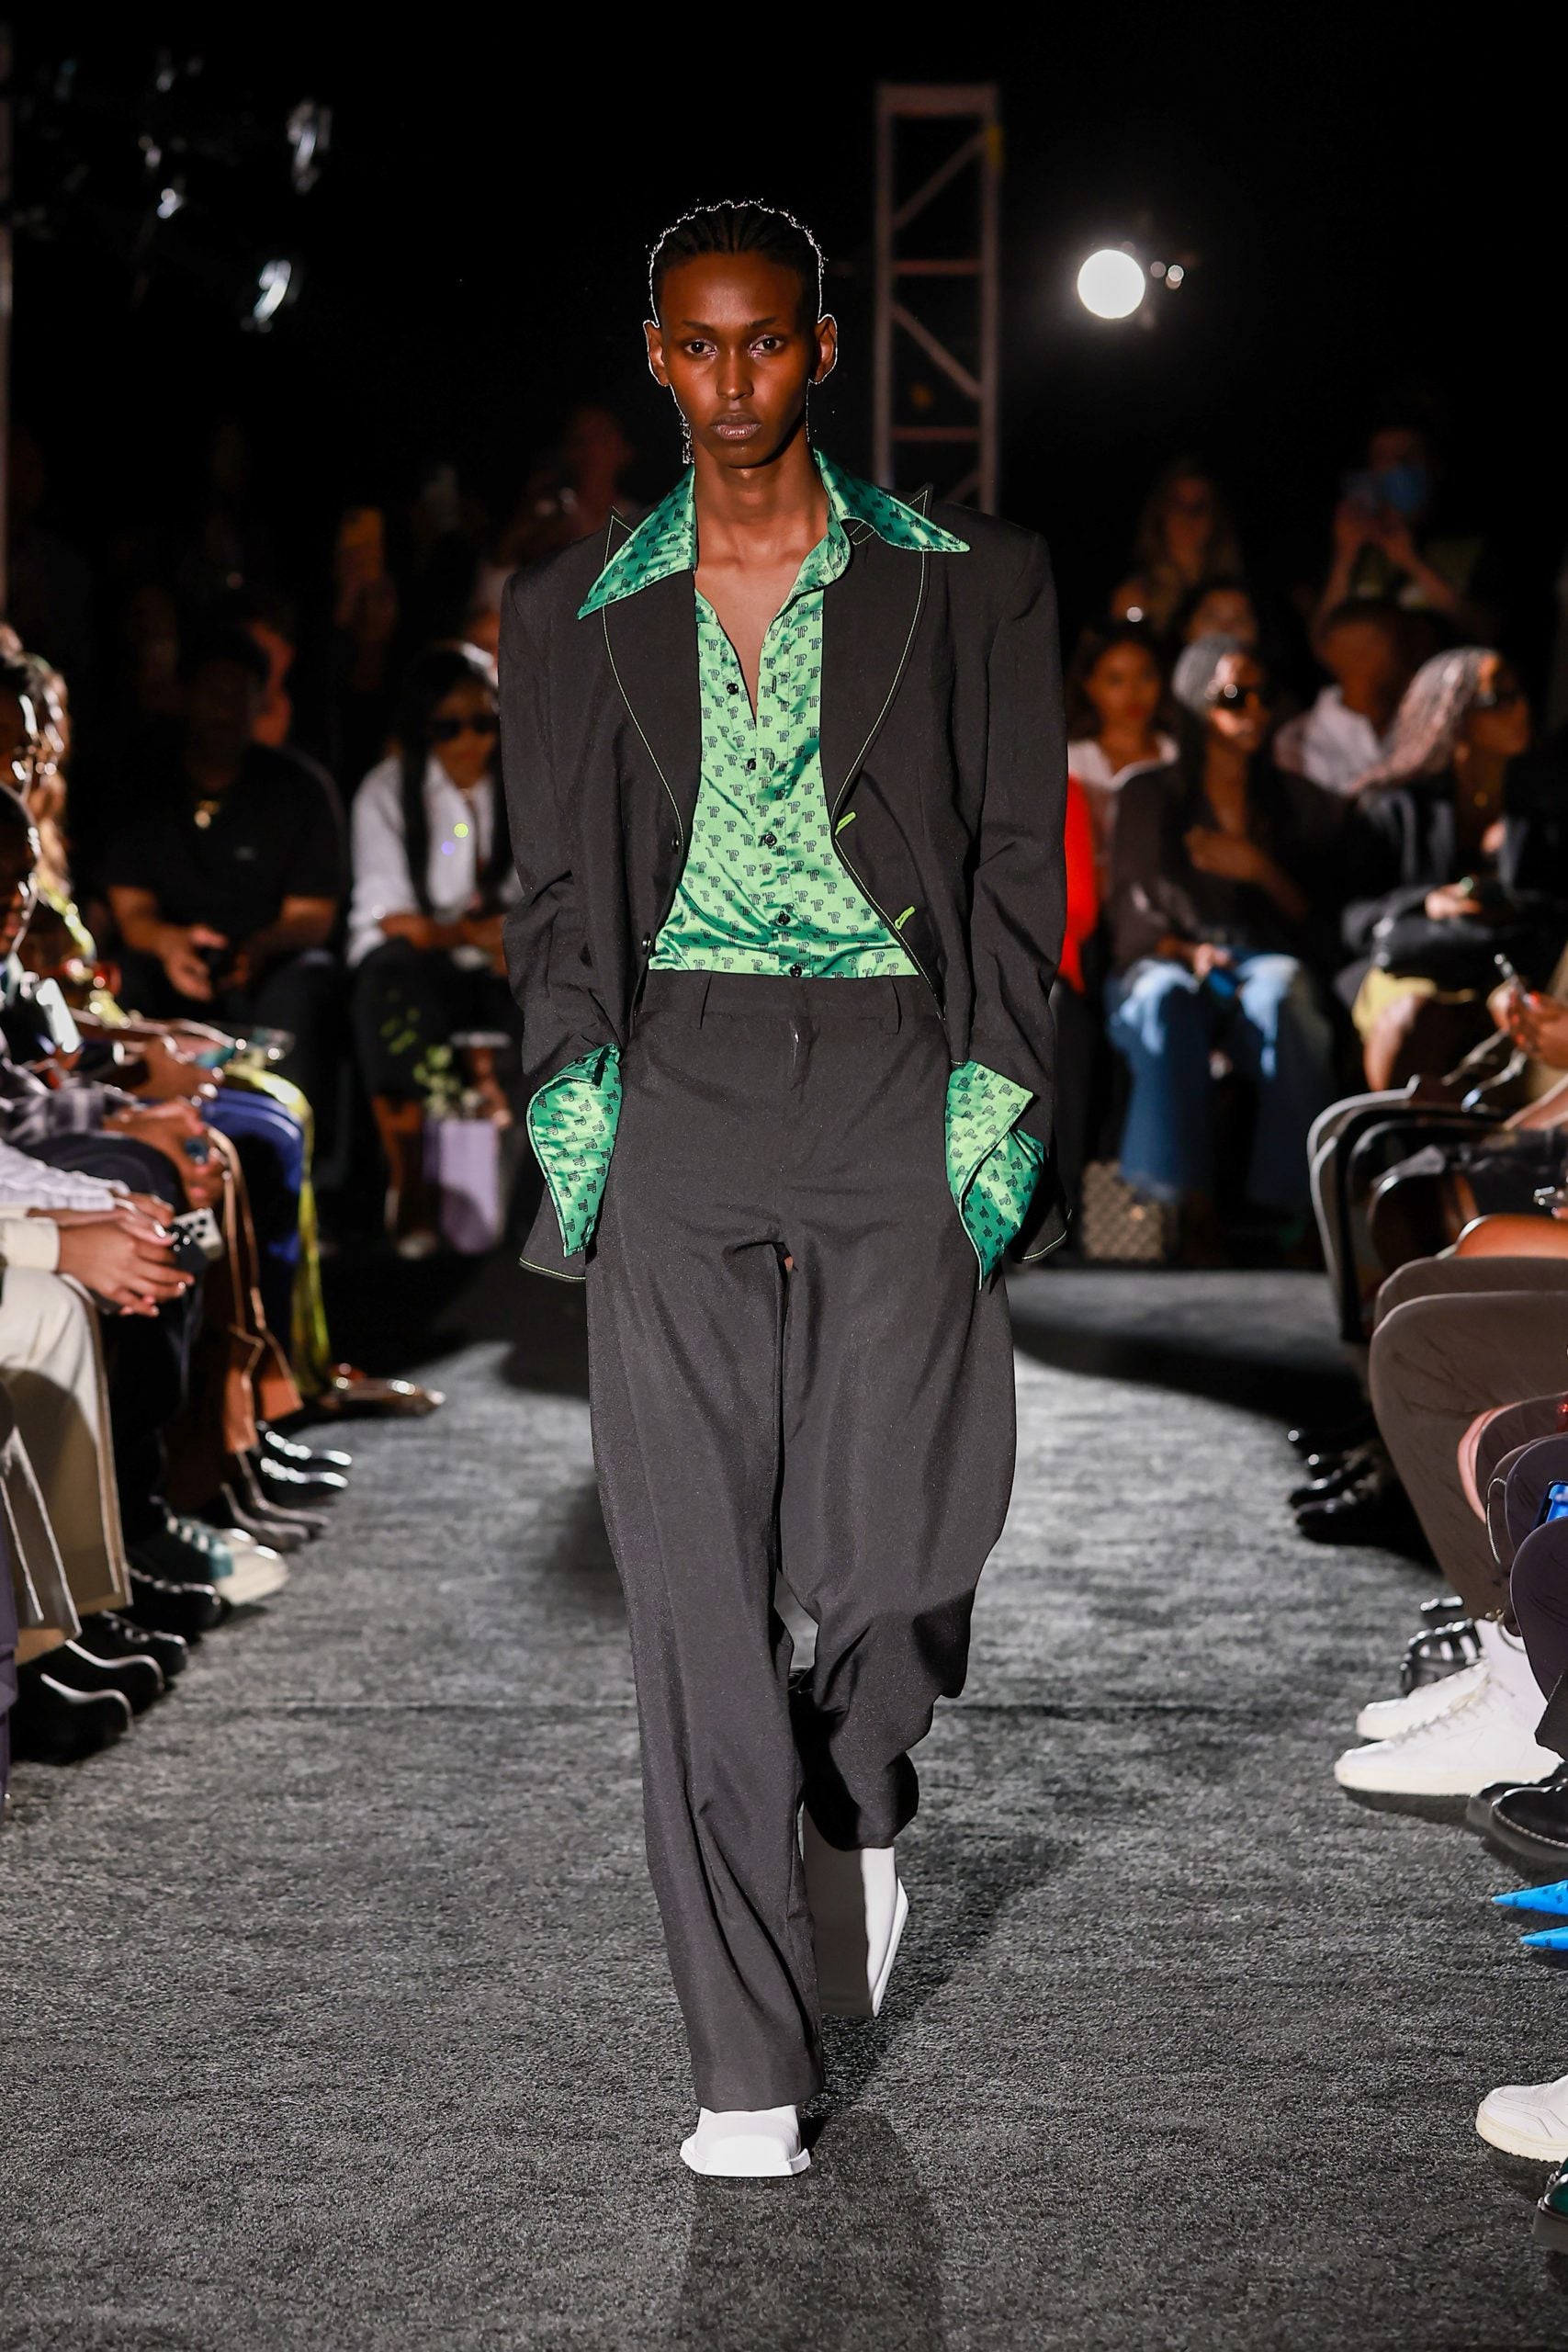 What Jamaican Aesthetics Bring To Fashion